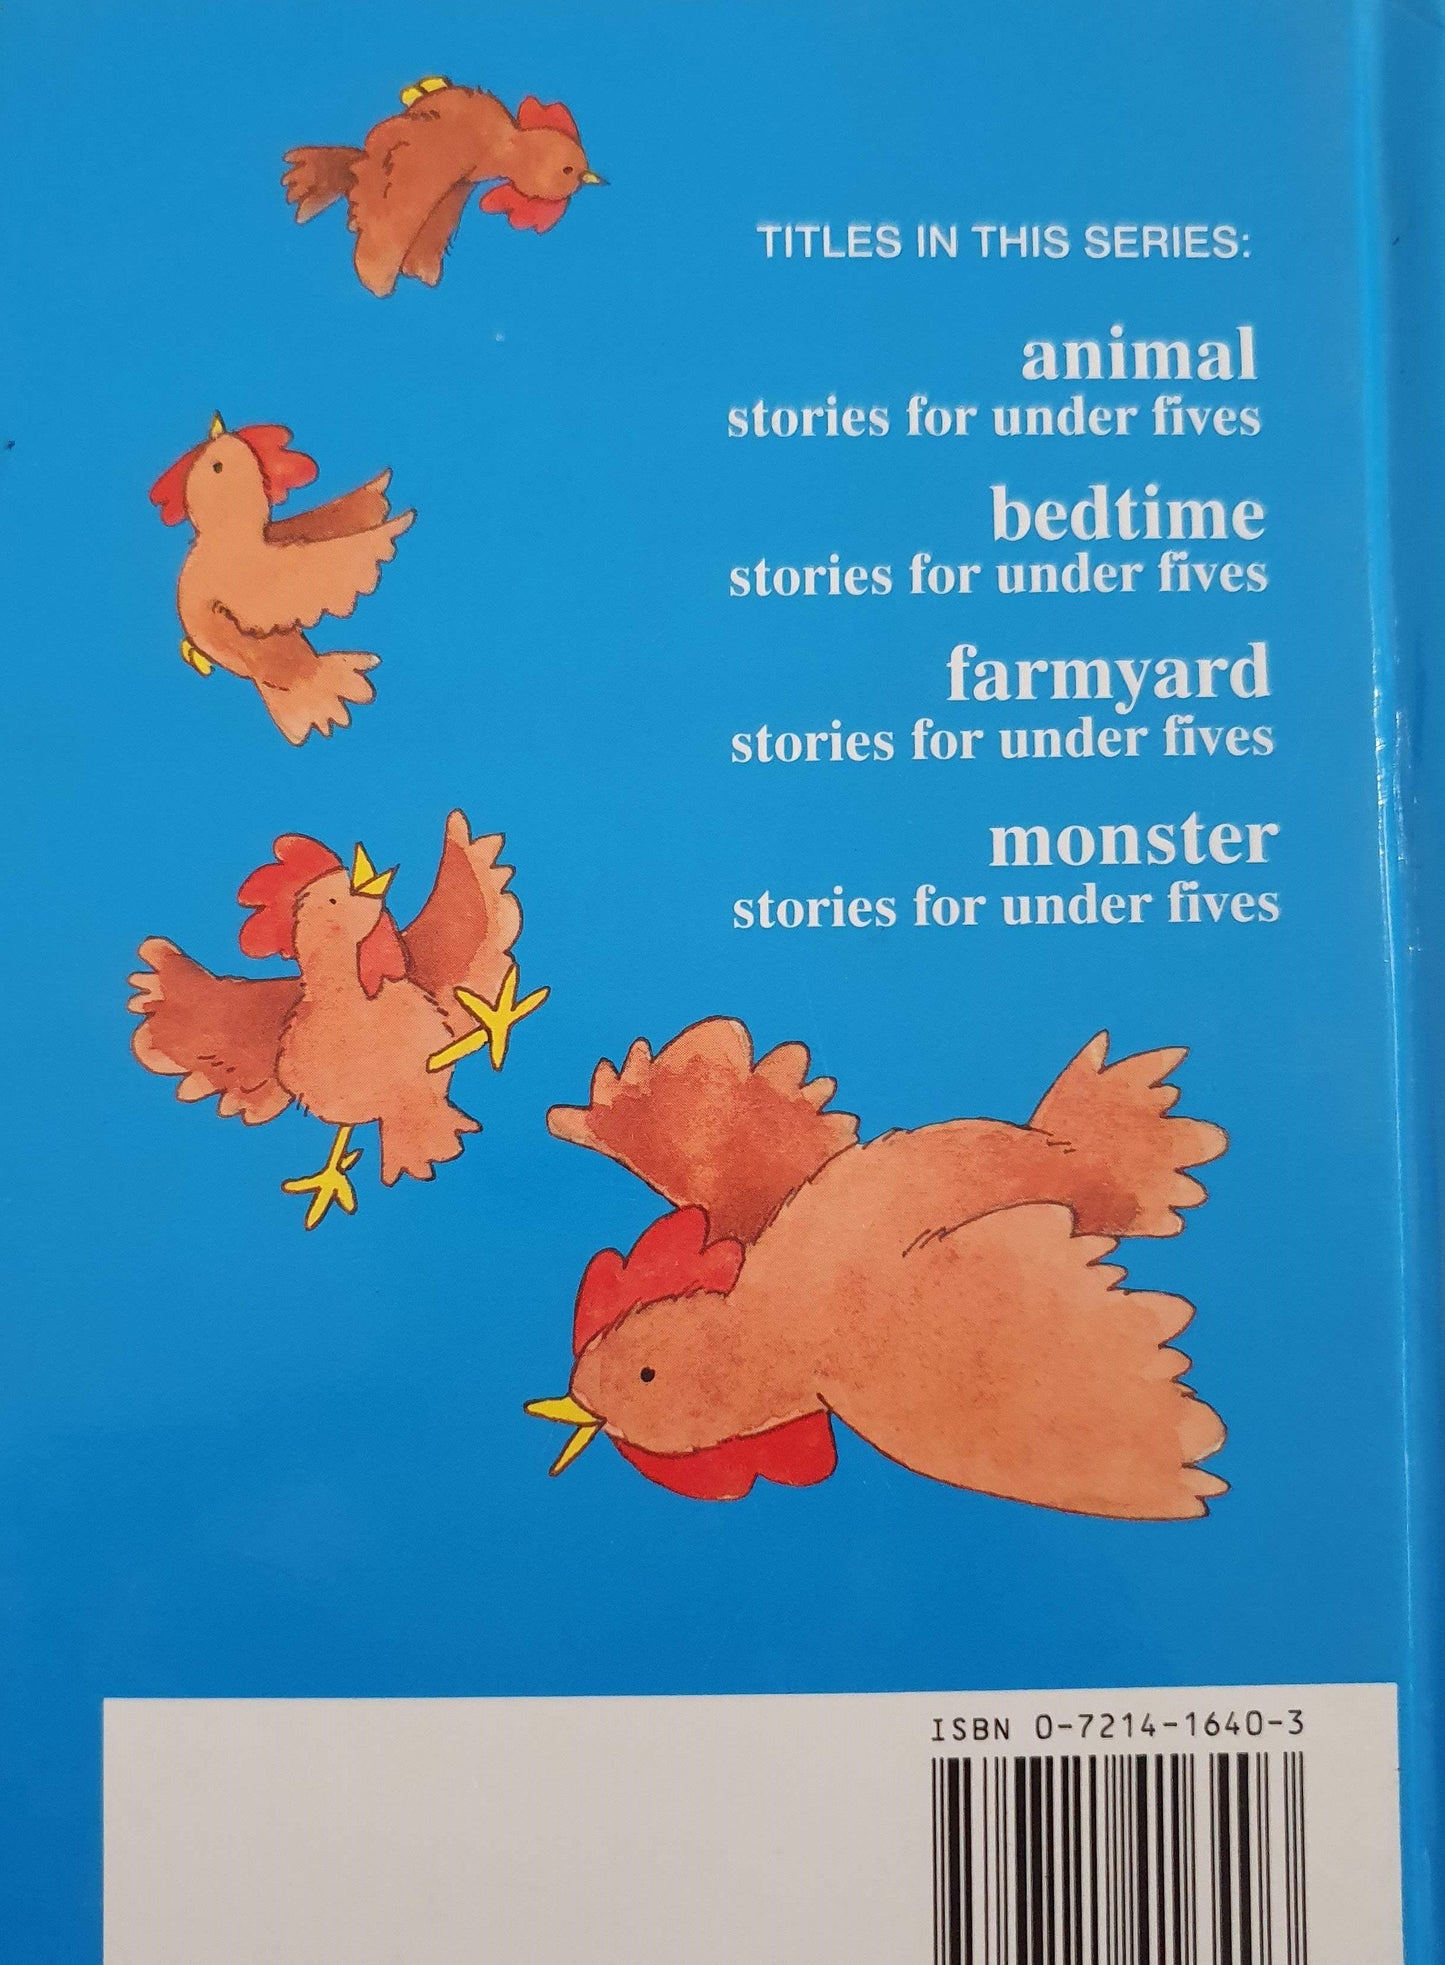 Farmyard stories for under fives Like New Ladybird  (6059217027257)